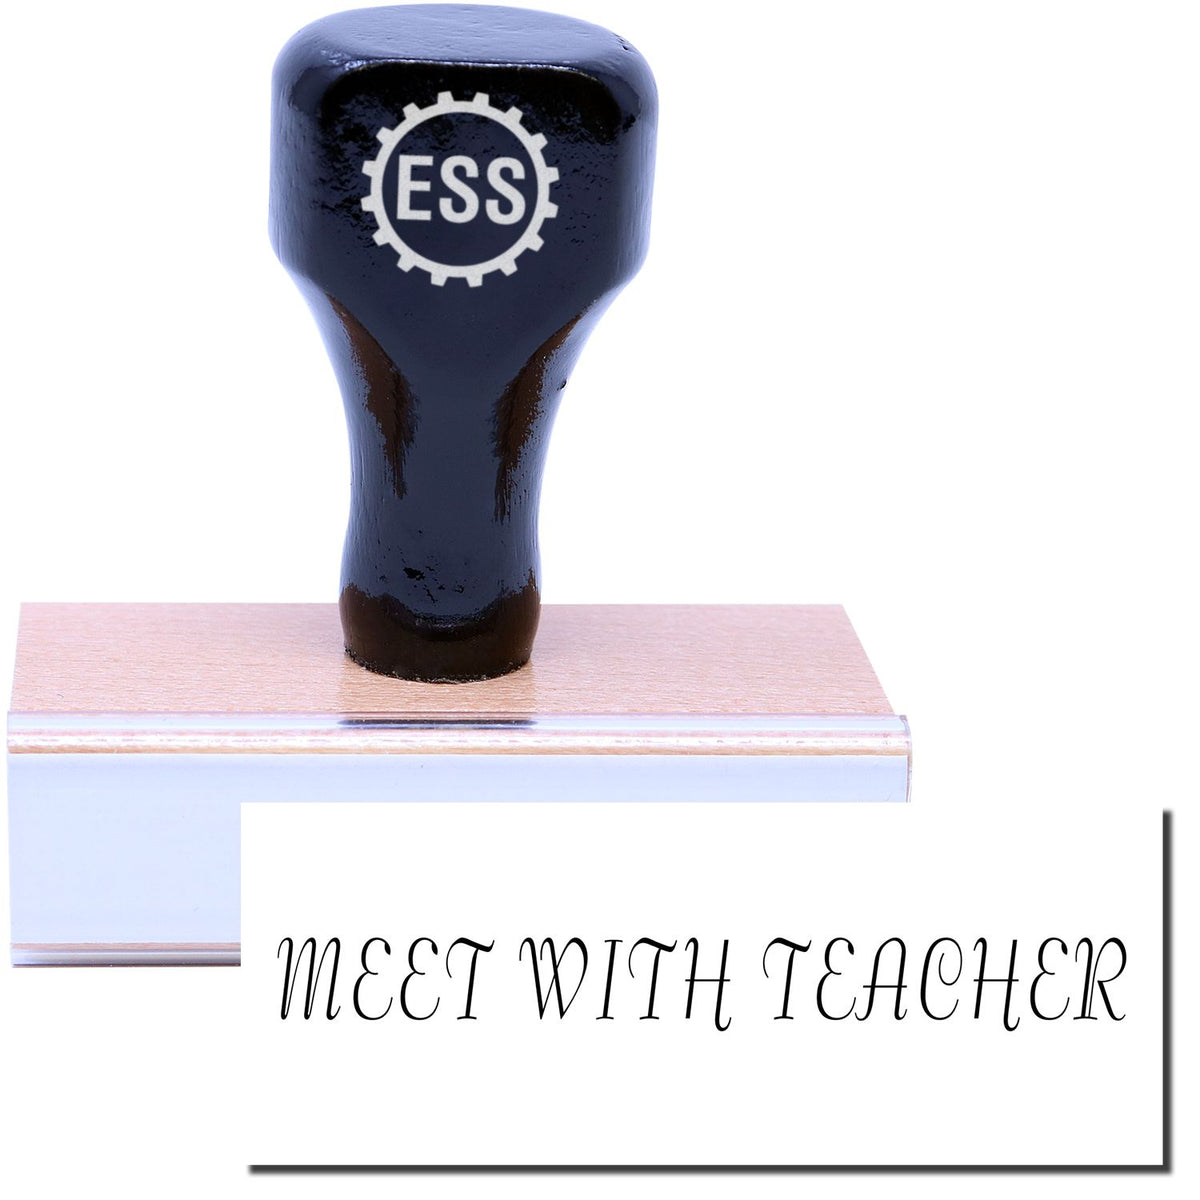 A stock office rubber stamp with a stamped image showing how the text &quot;MEET WITH TEACHER&quot; is displayed after stamping.